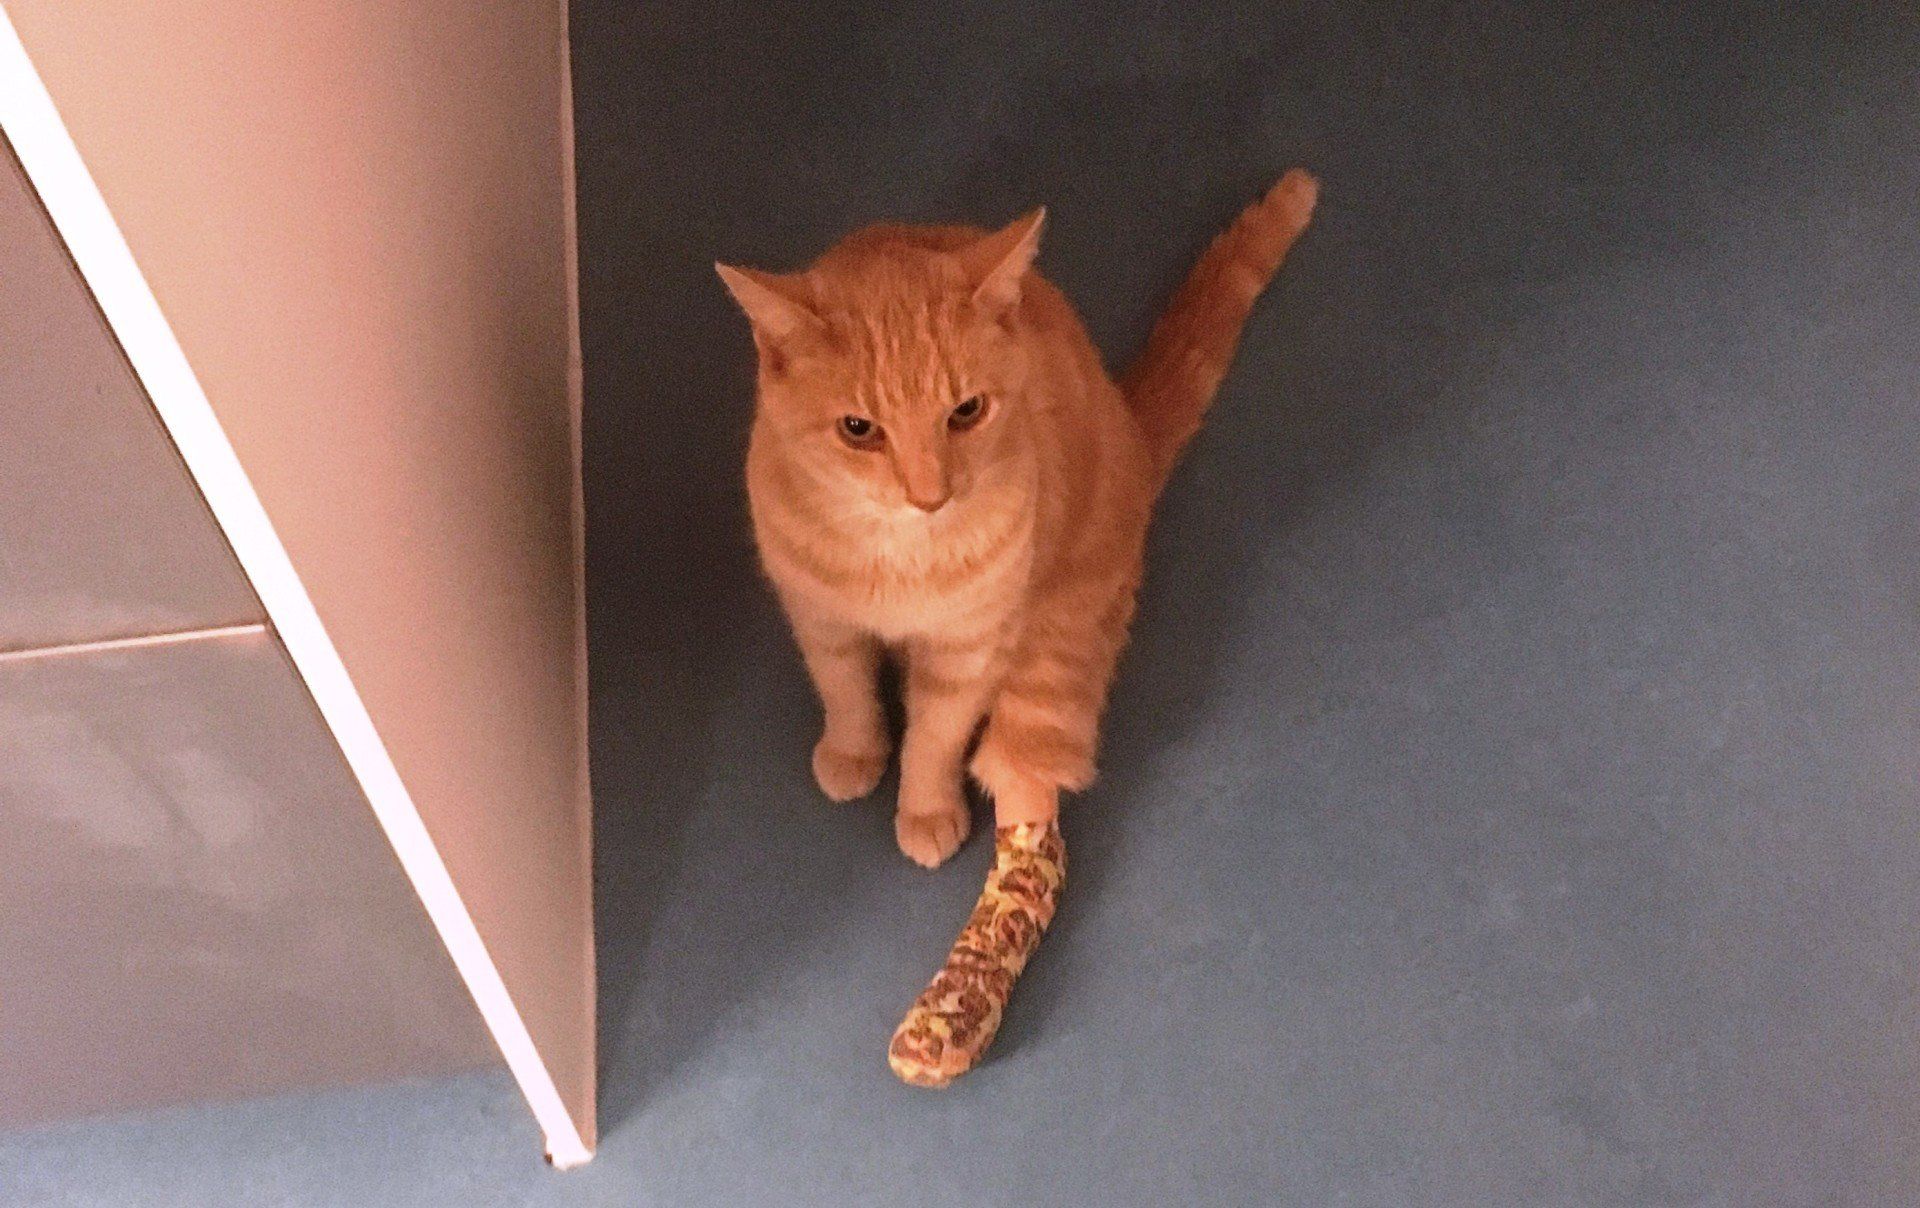 Physio John Moore's cat with injured paw!